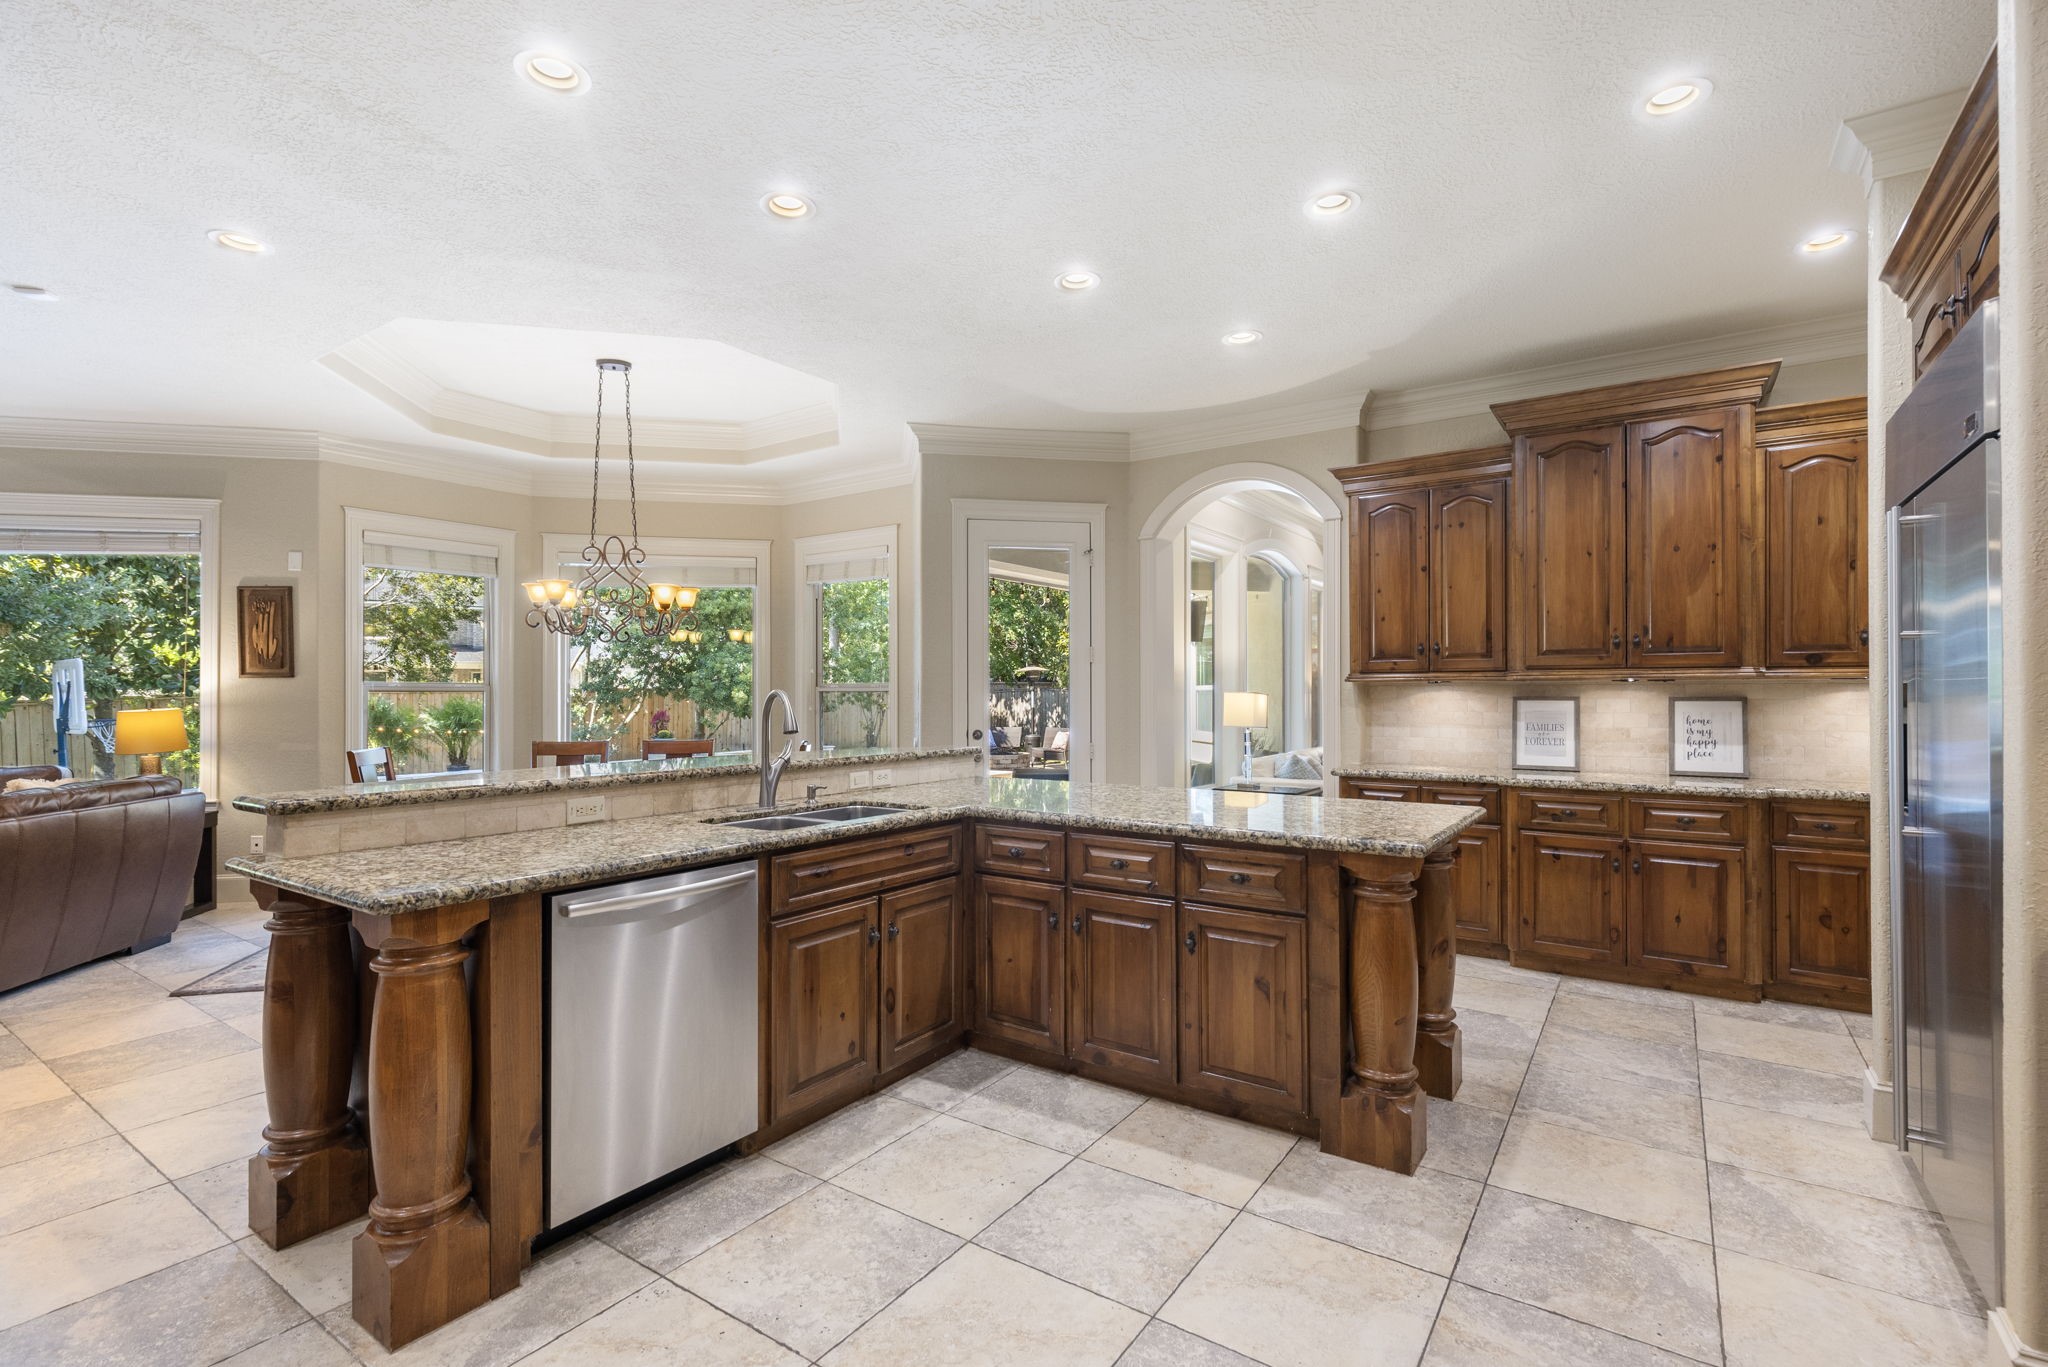 The kitchen offers an intricate center island that features additional seating, dishwasher and double under the counter mounted sink.